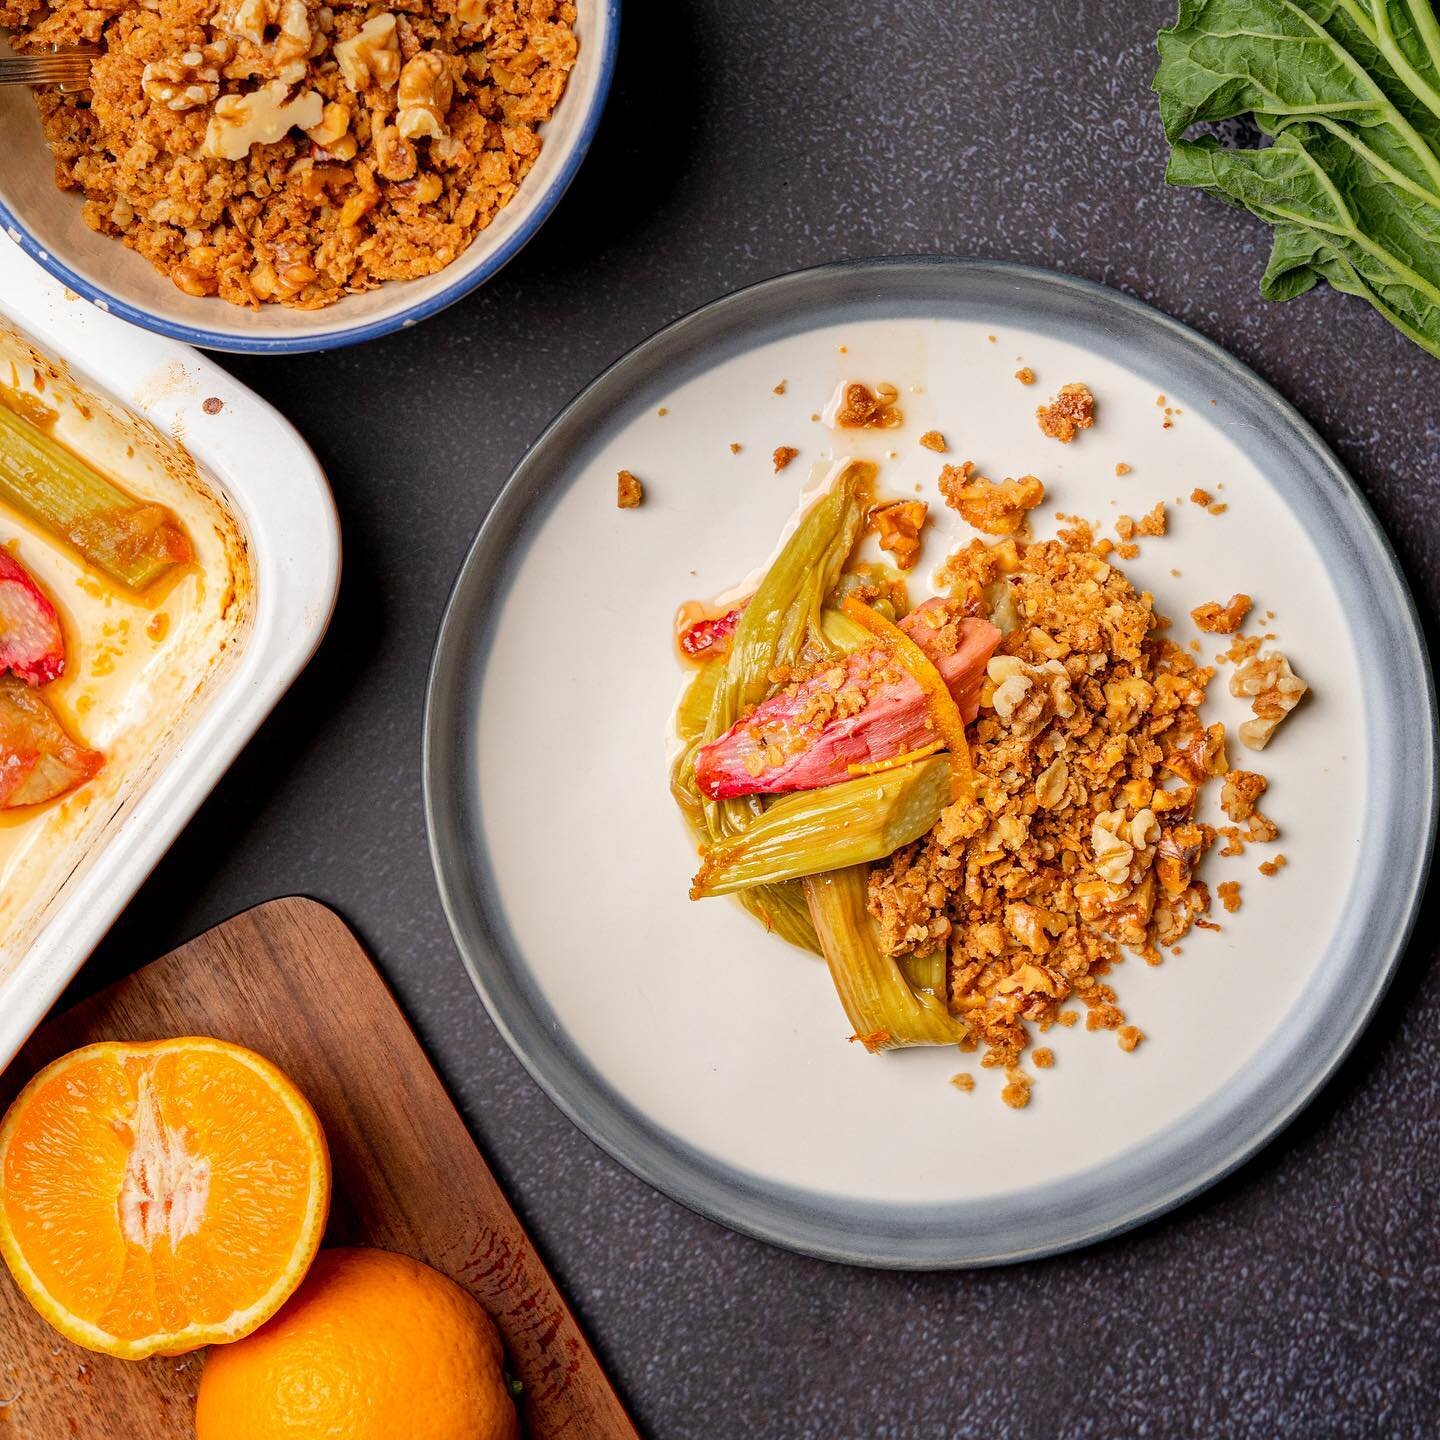 😋 Nutmeg-spiced Rhubarb Crumble 😋
What best way to celebrate spring AND the arrival of Gold Nutmeg from Grenada in our pantry! It's a simple, yet delicious recipe, where Royal Cinnamon also makes an appearance 😎

Ingredients:

For the Filling:
500